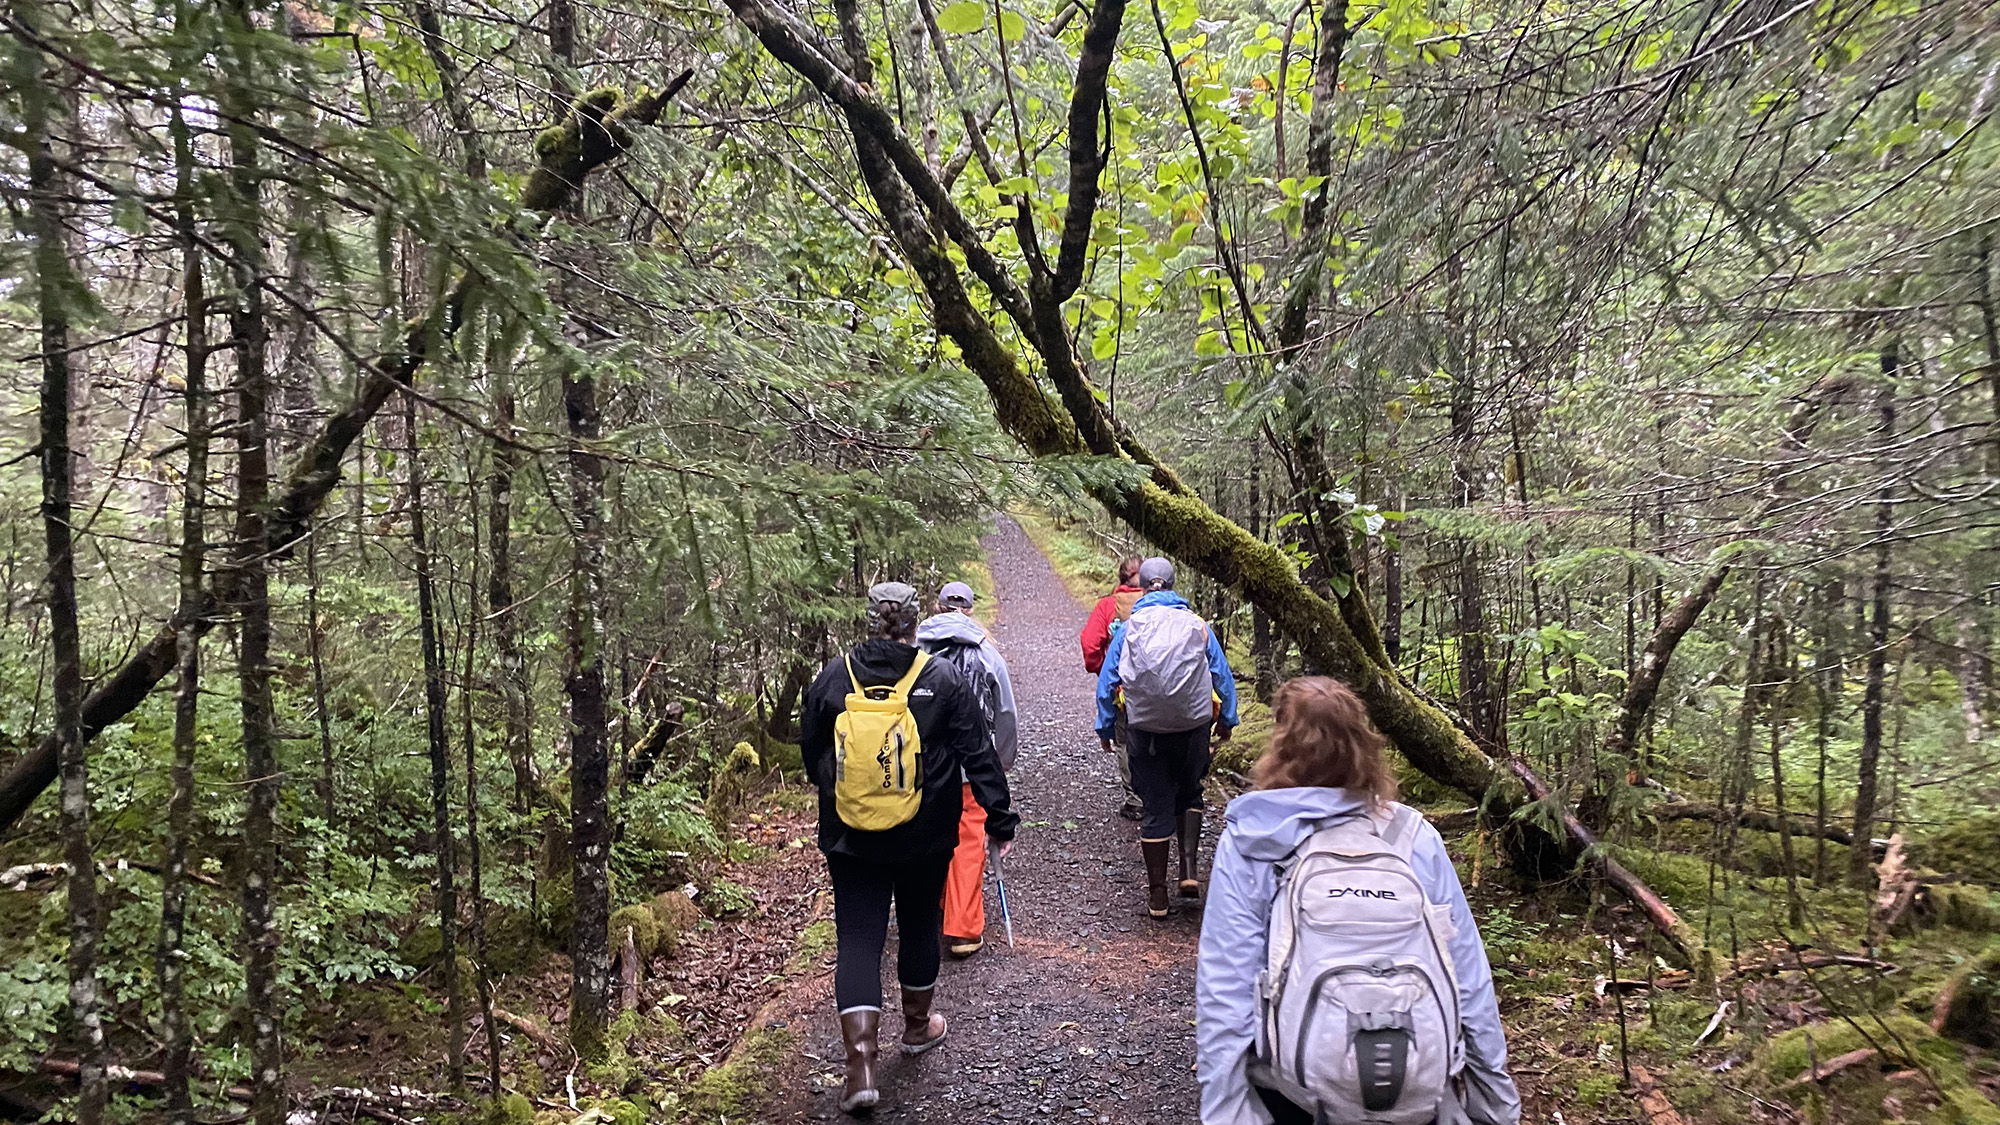 OHA staff walks along the historic road to Fort McGilvrary, first built by the U.S. Army Corps of Engineers in 1941. Although once connecting Fort McGilvrary's four distinct areas, the Army never built a road to connect Fort McGilvrary to Fort Raymond in Seward. September 2021.